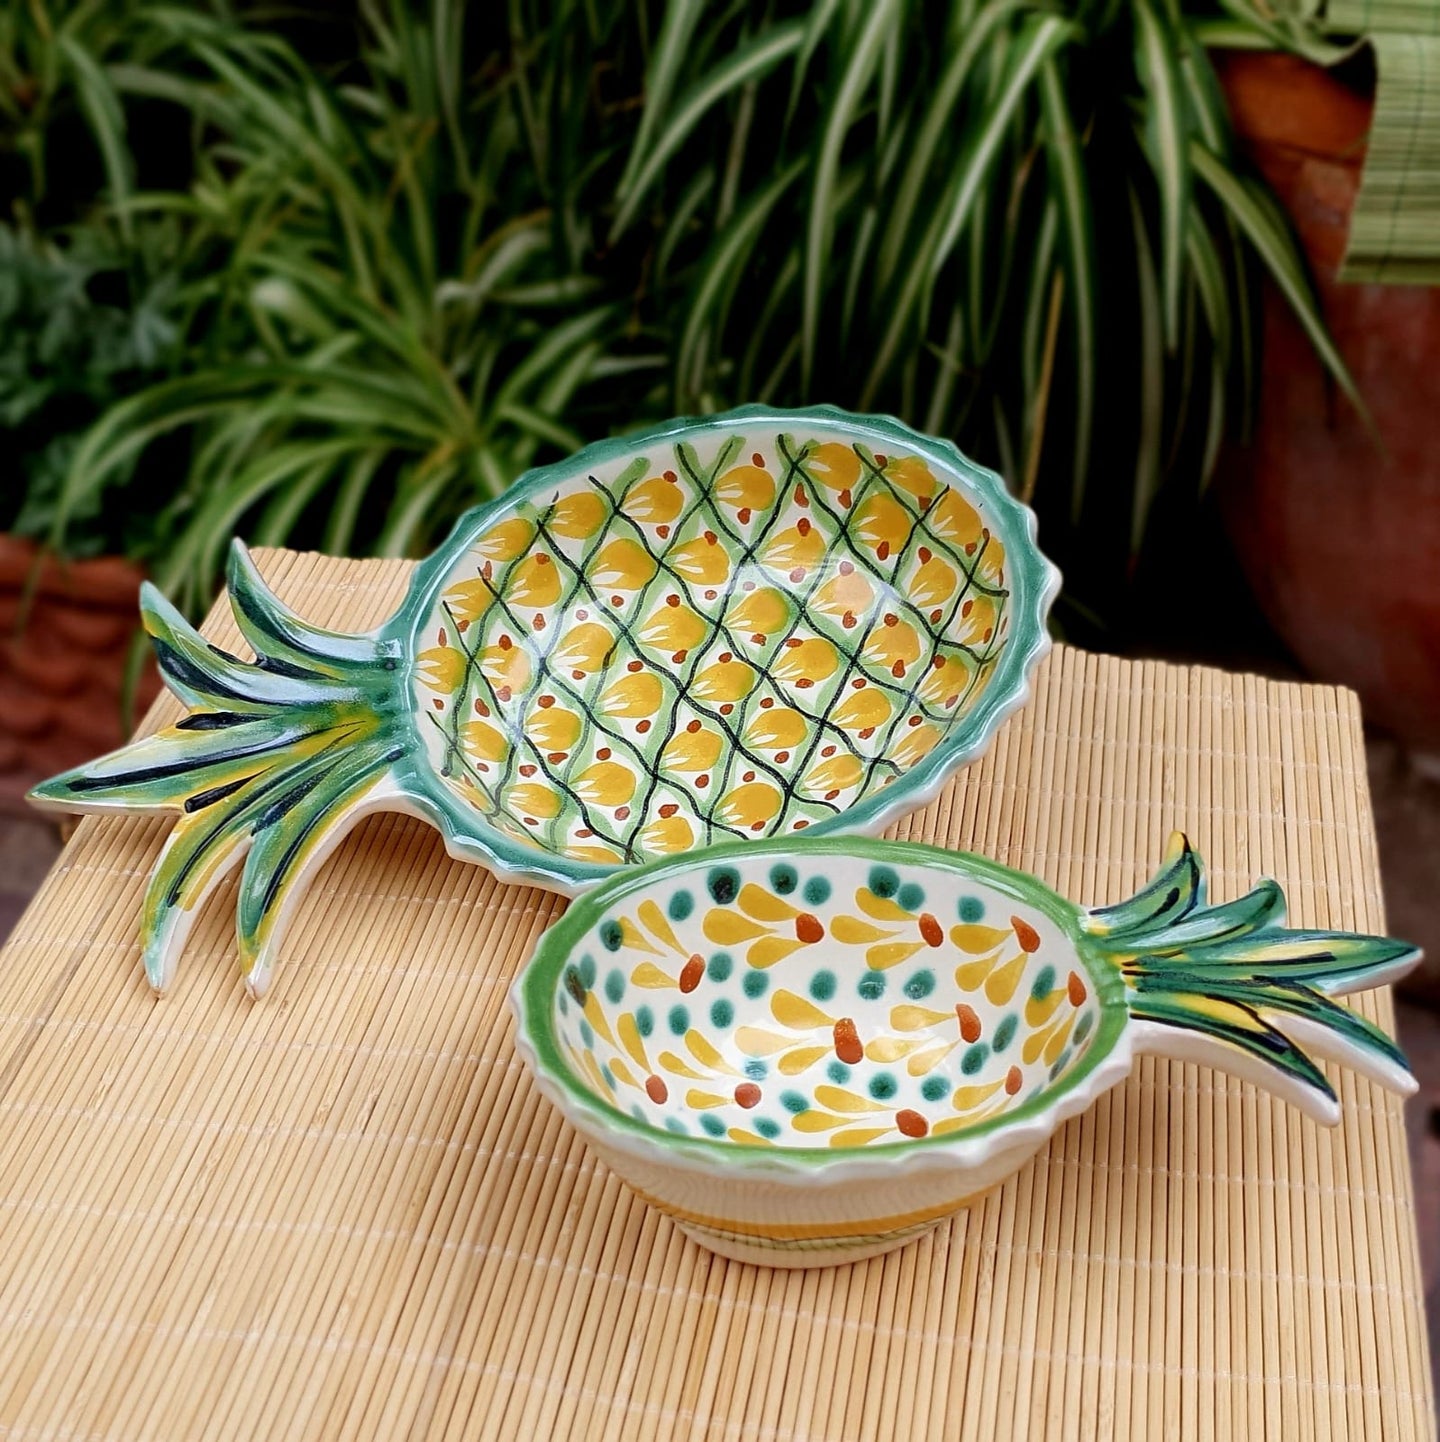 Pineapple Snack Bowls Set of 2 MultiColors